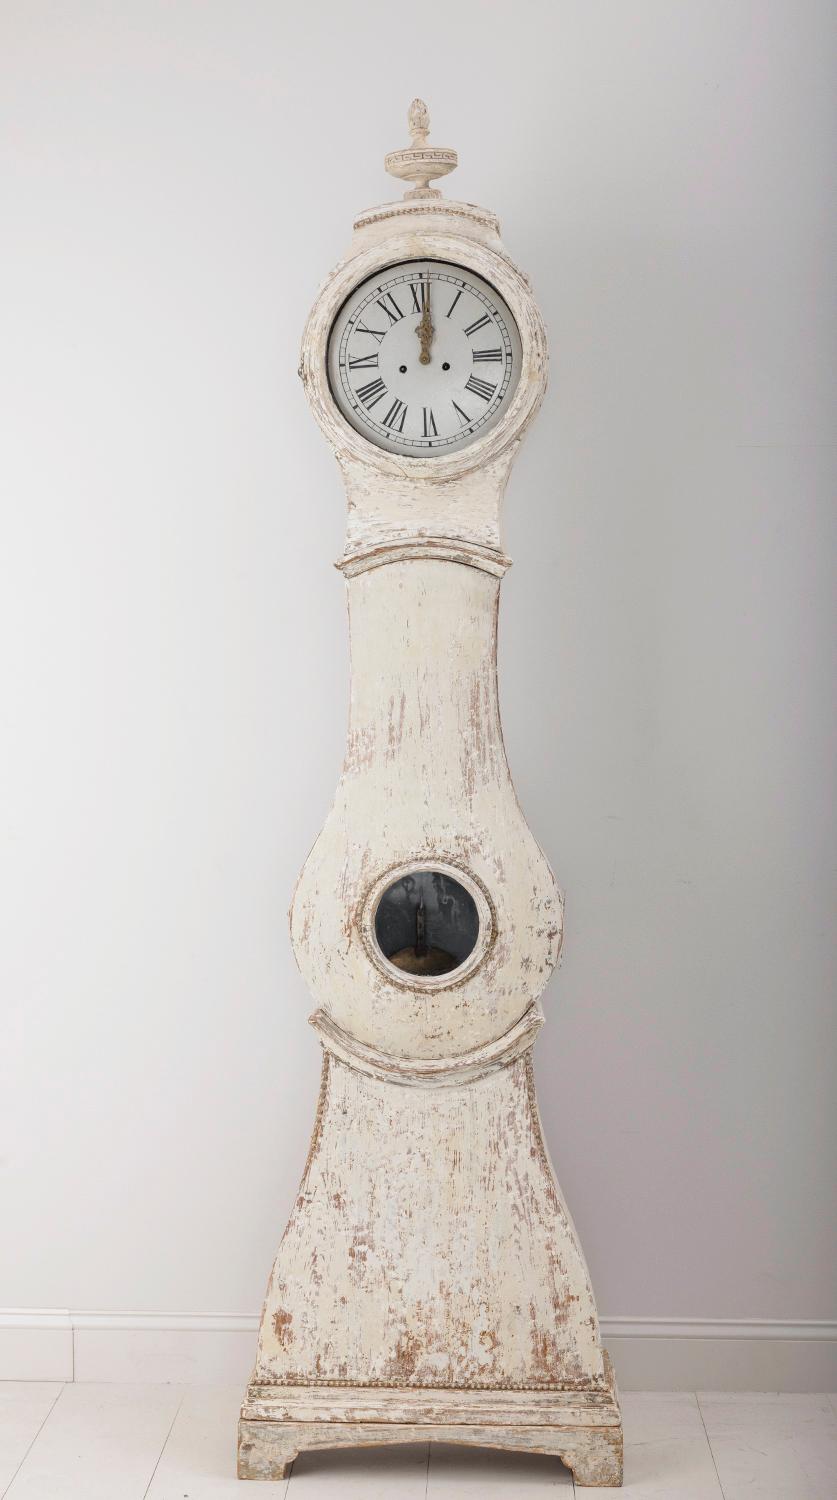 An 18th century Swedish Mora clock from the Gustavian period hand-scraped to reveal the original paint surface, circa 1790. Truly a stunning long case clock from top to bottom. The bonnet features a carved torch finial and the bottom of the